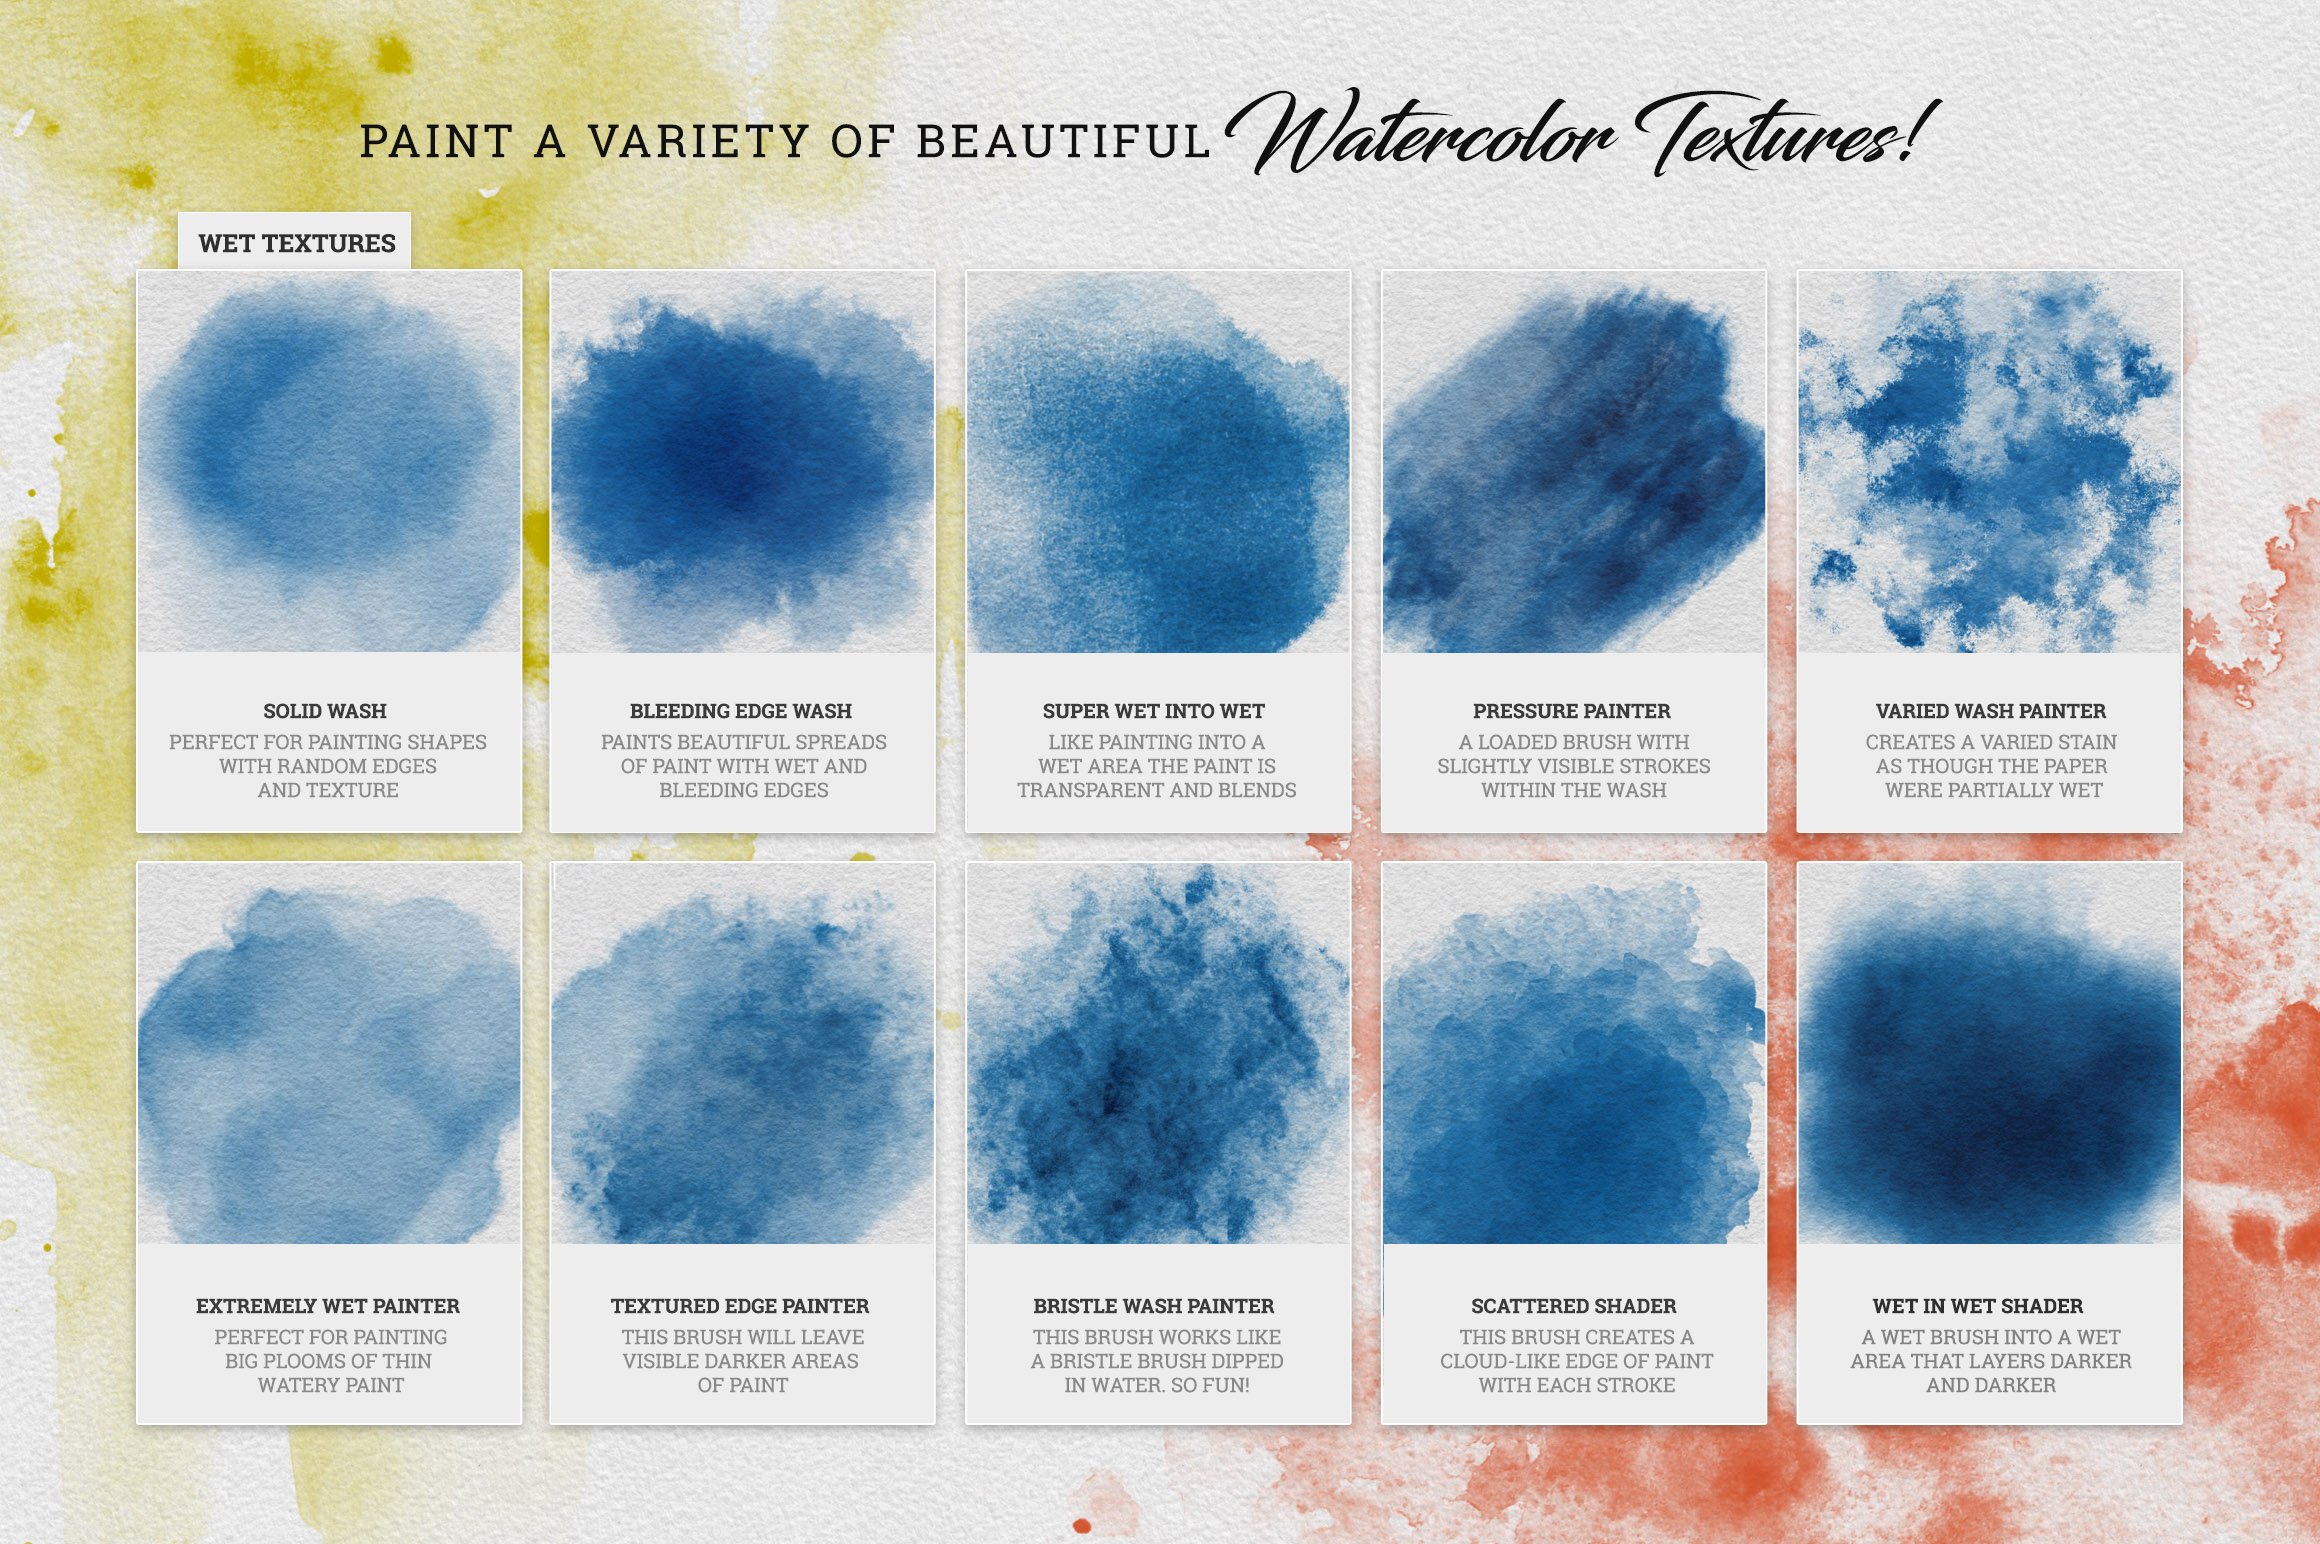 Paint a variety of beautiful watercolor textures.